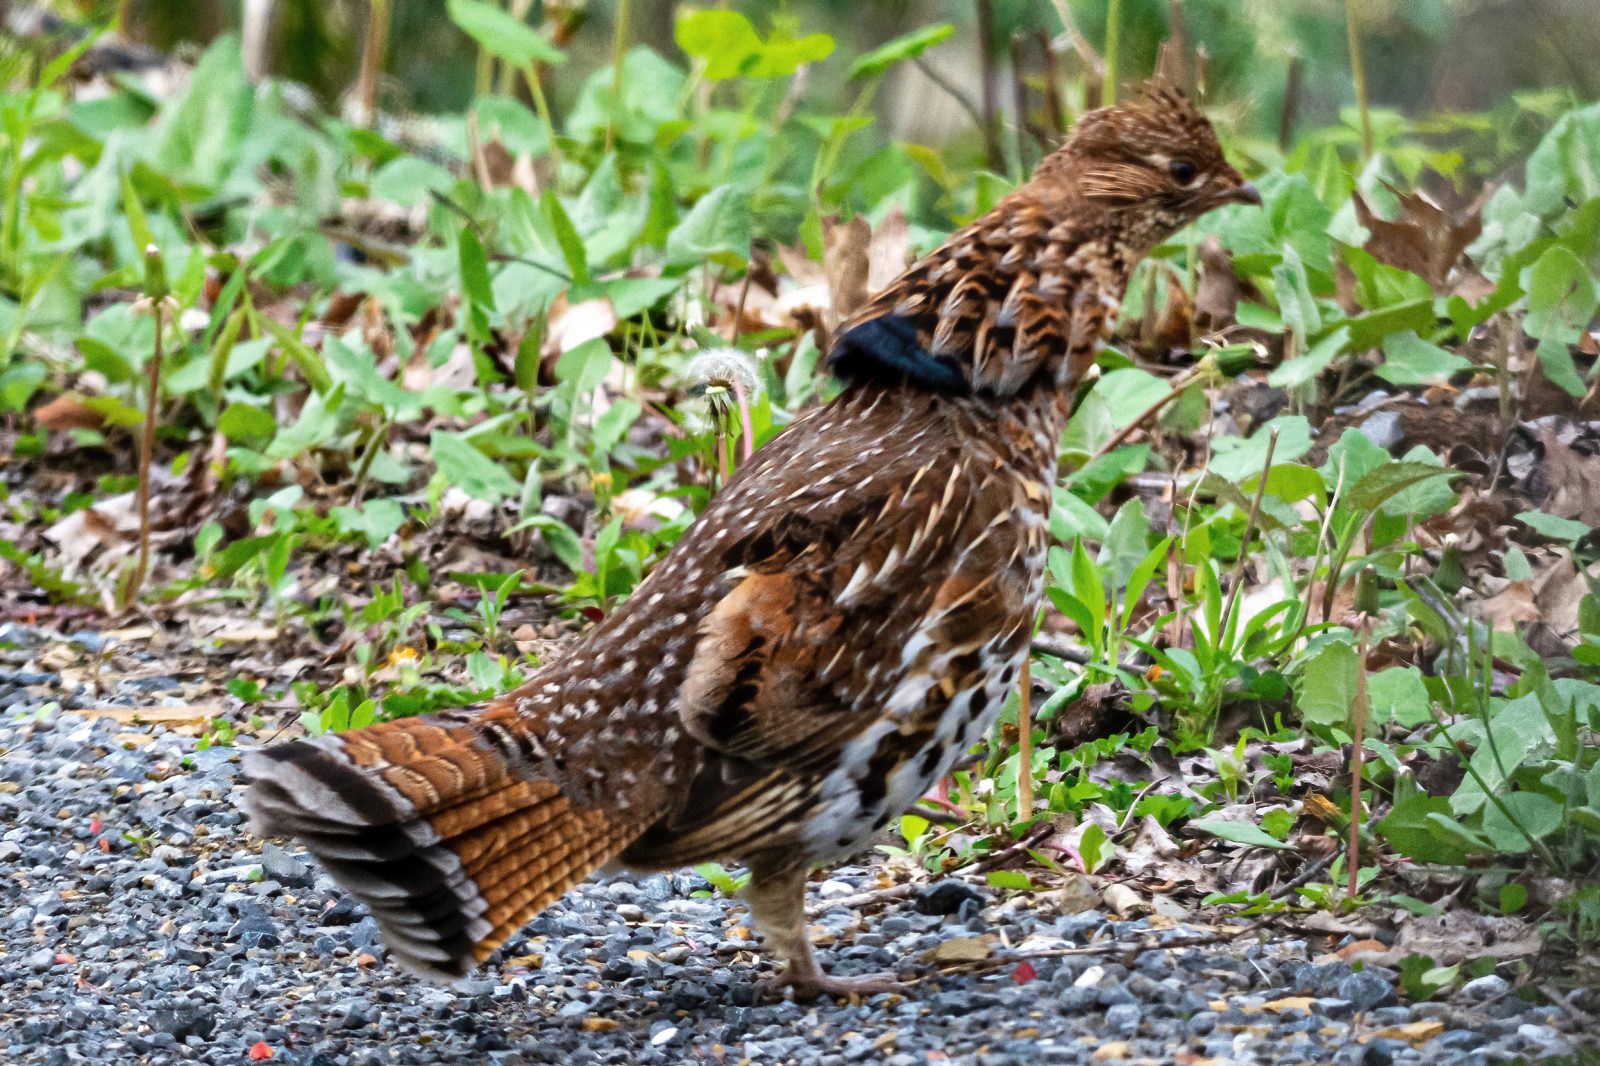 An image of a ruffed grouse in the road